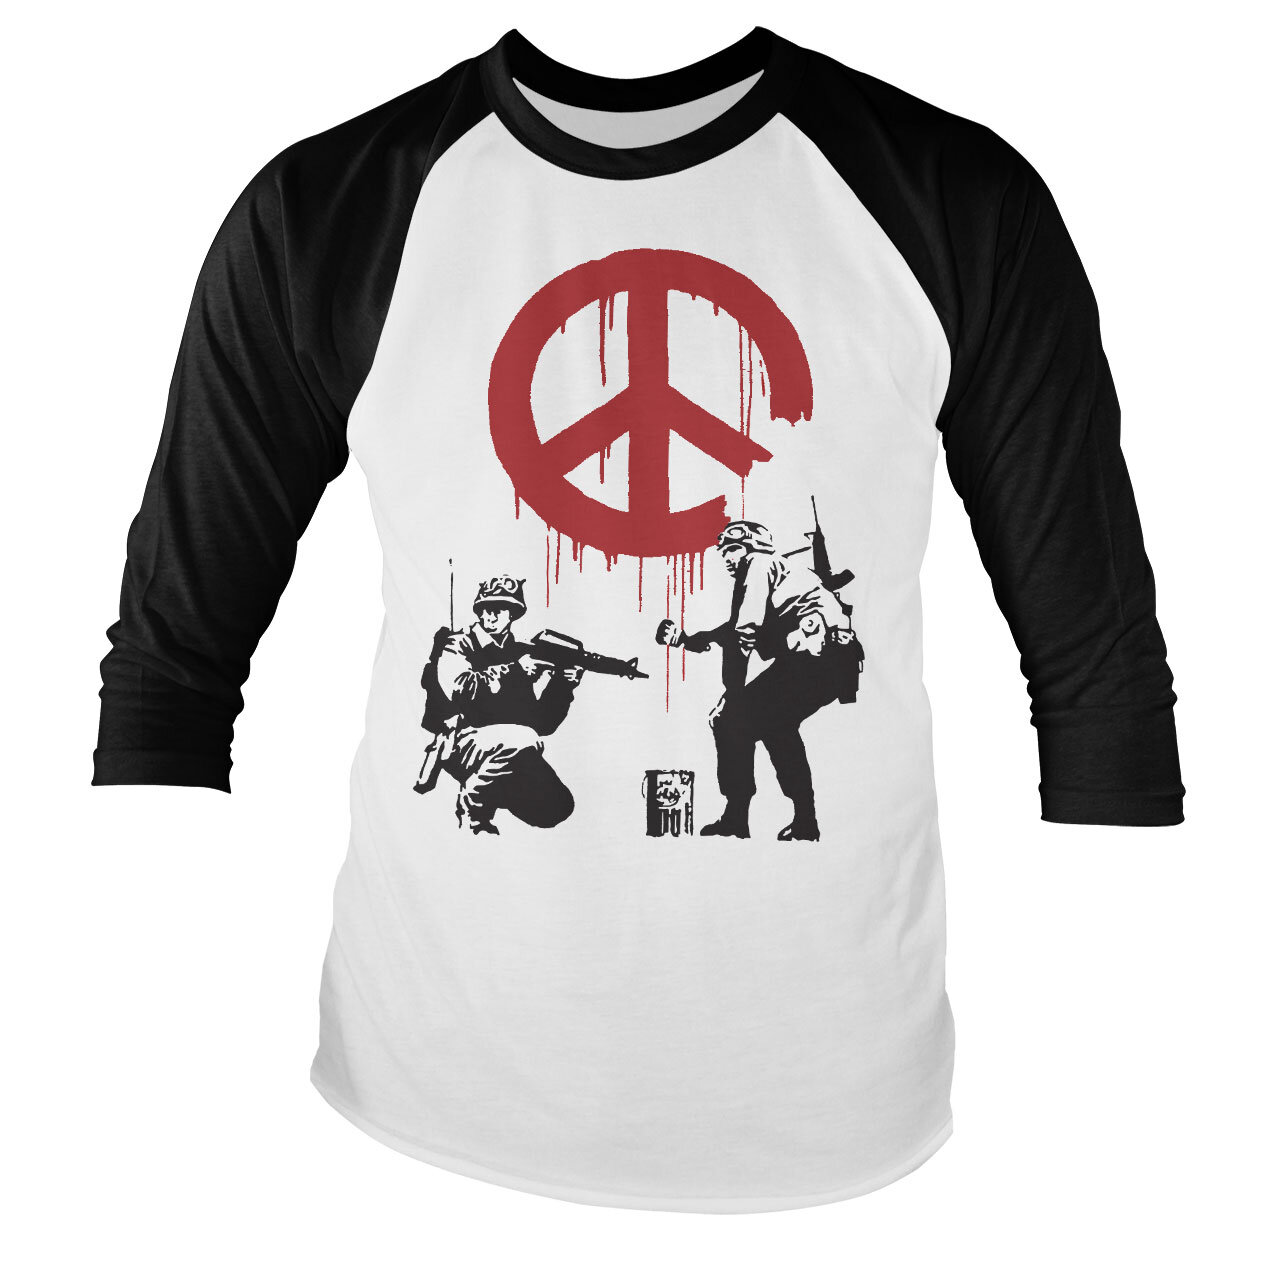 Soldiers Painting CND Sign Baseball Long Sleeve Tee